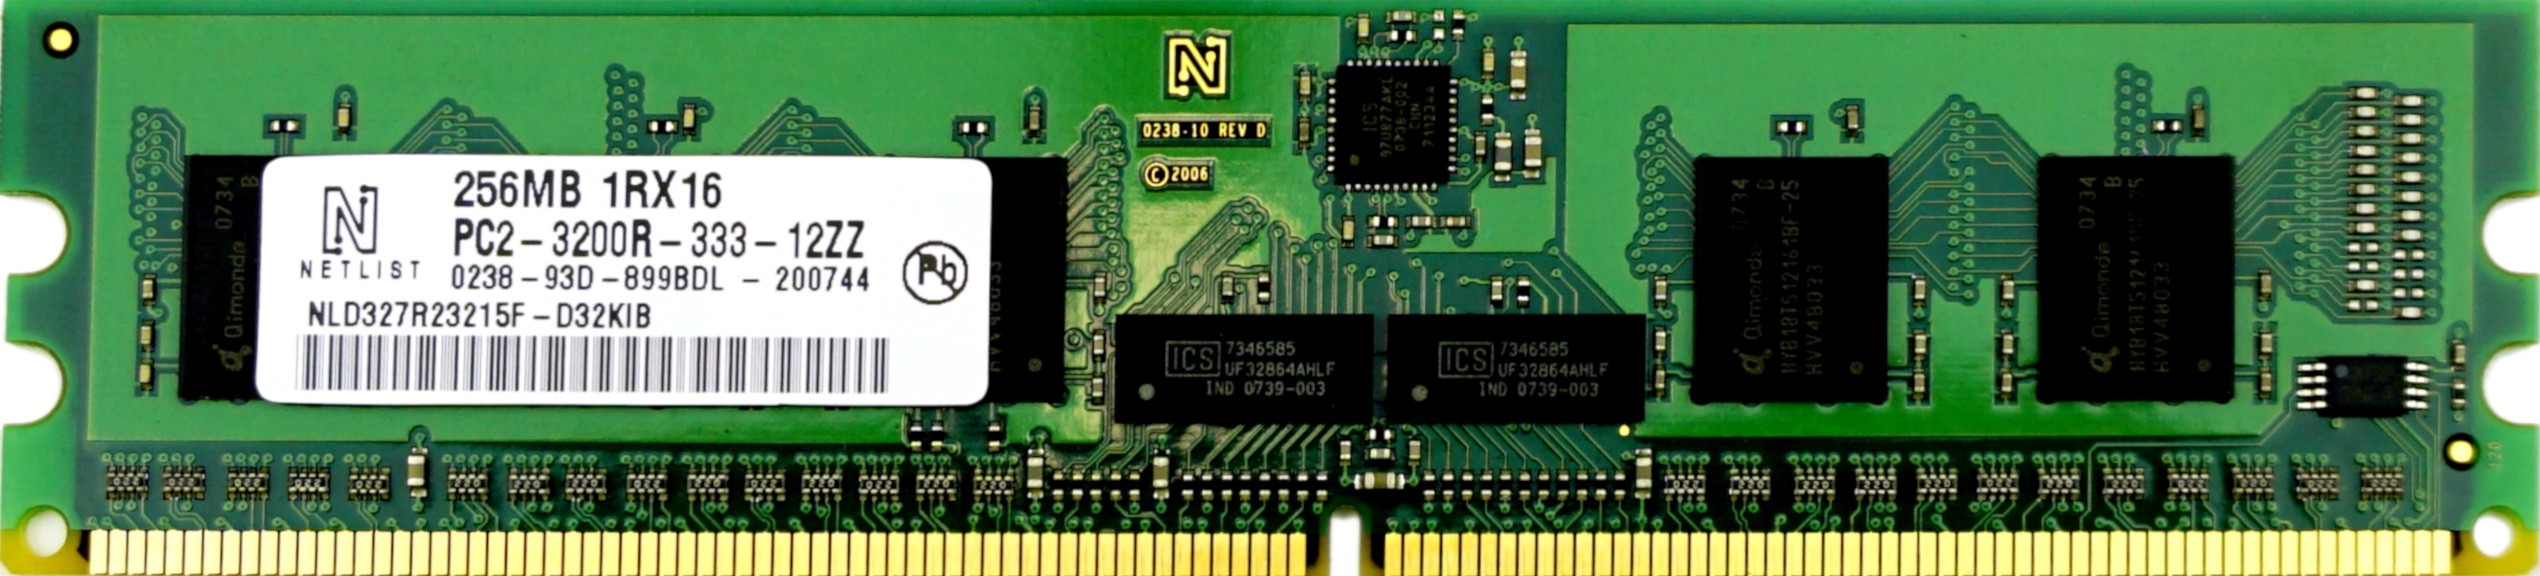 Unbranded - 256MB PC2-3200R (DDR2-400Mhz, 1RX16)